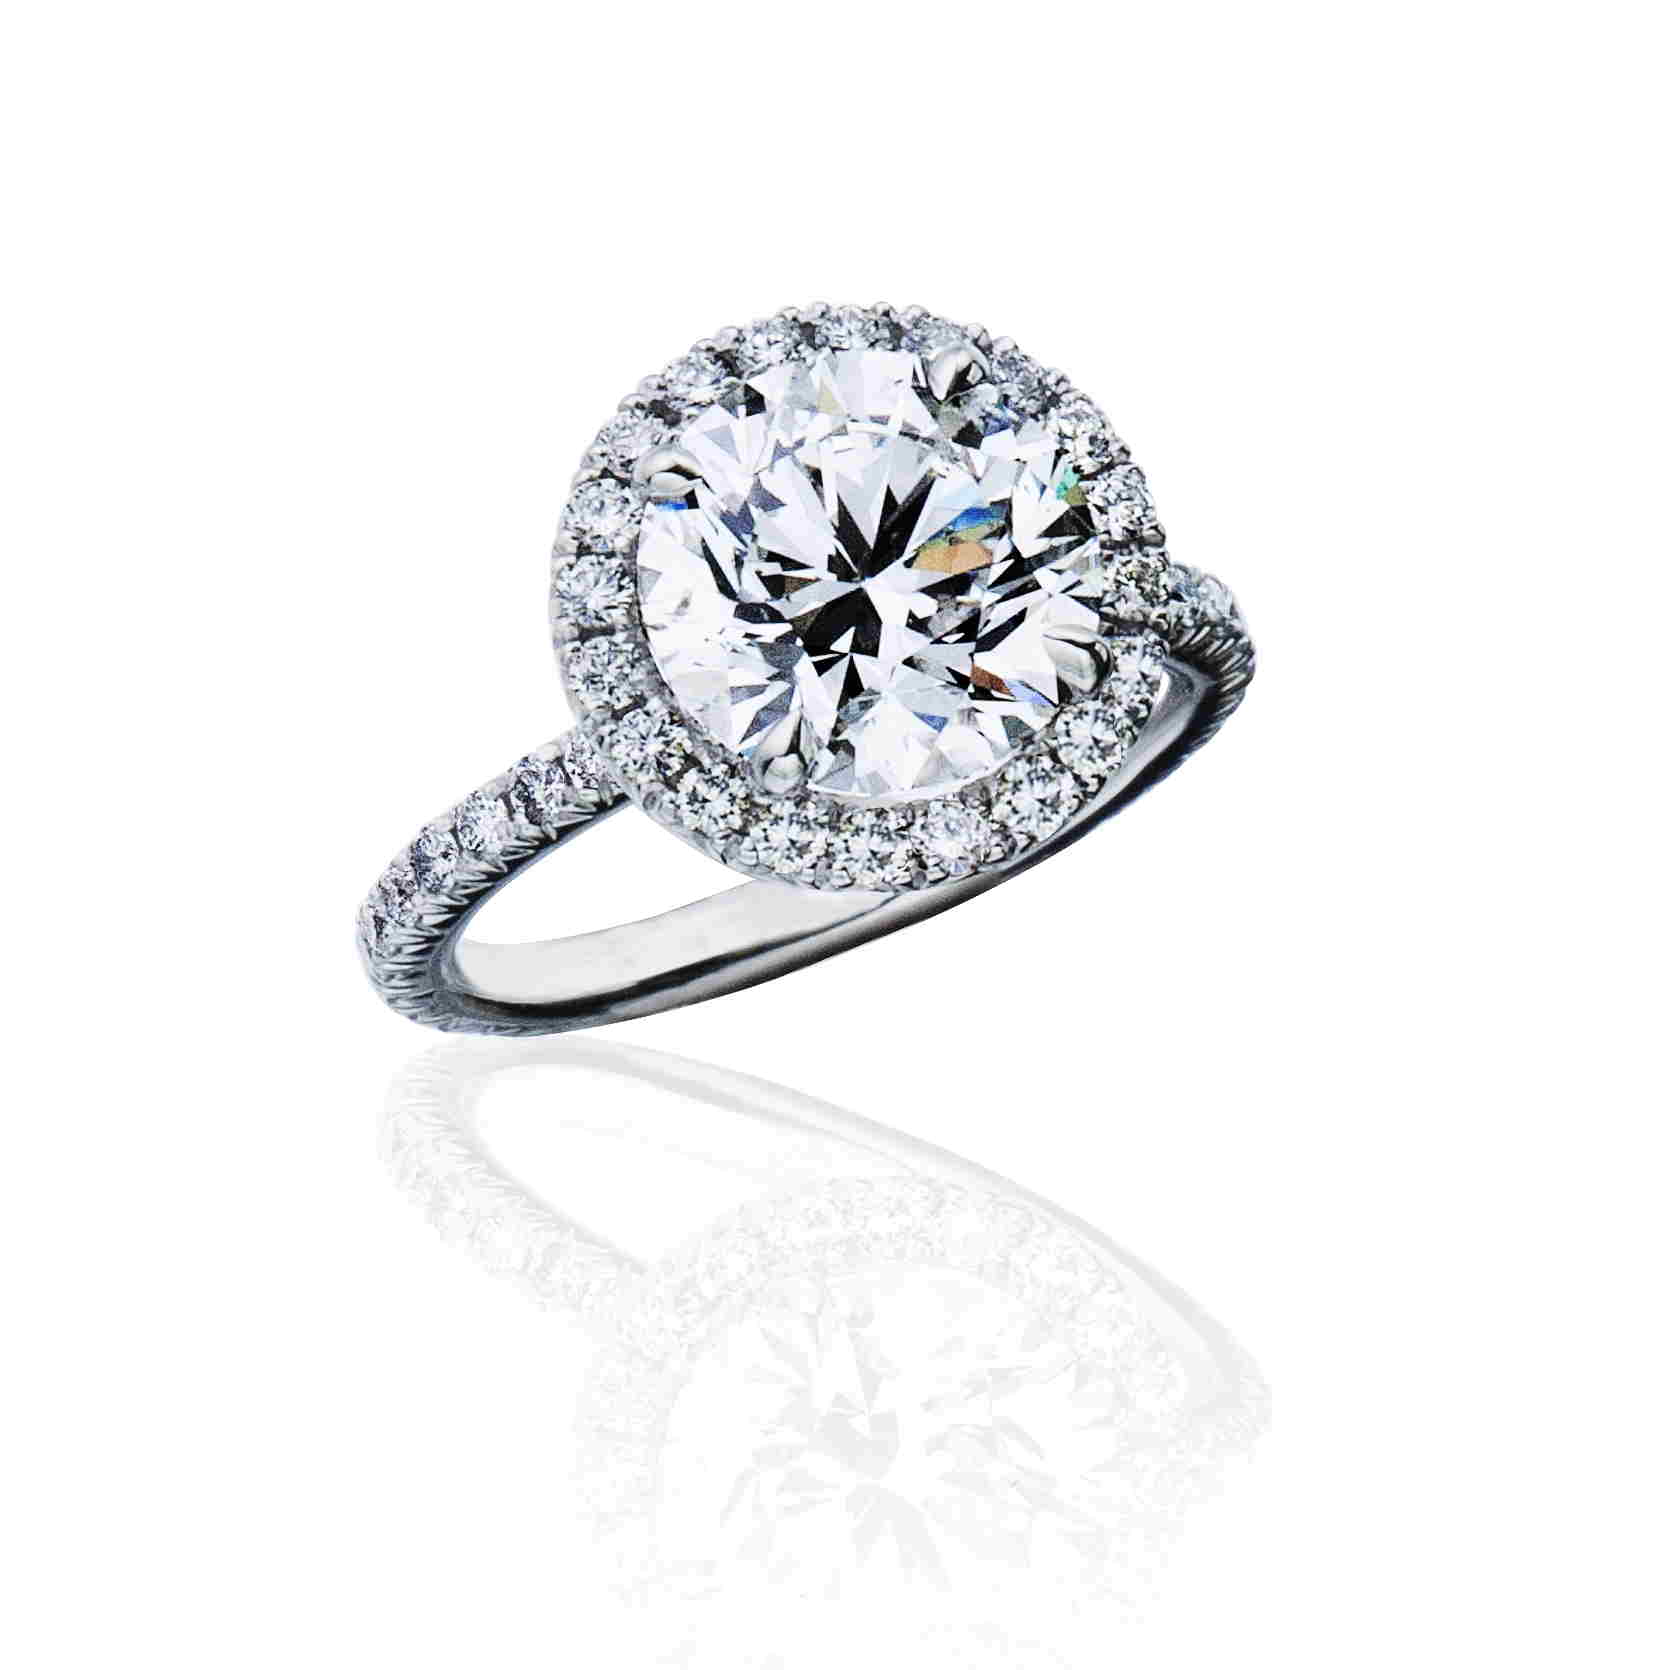 Engagement ring with round jewel — Jewelers in Bloomfield Hills, MI